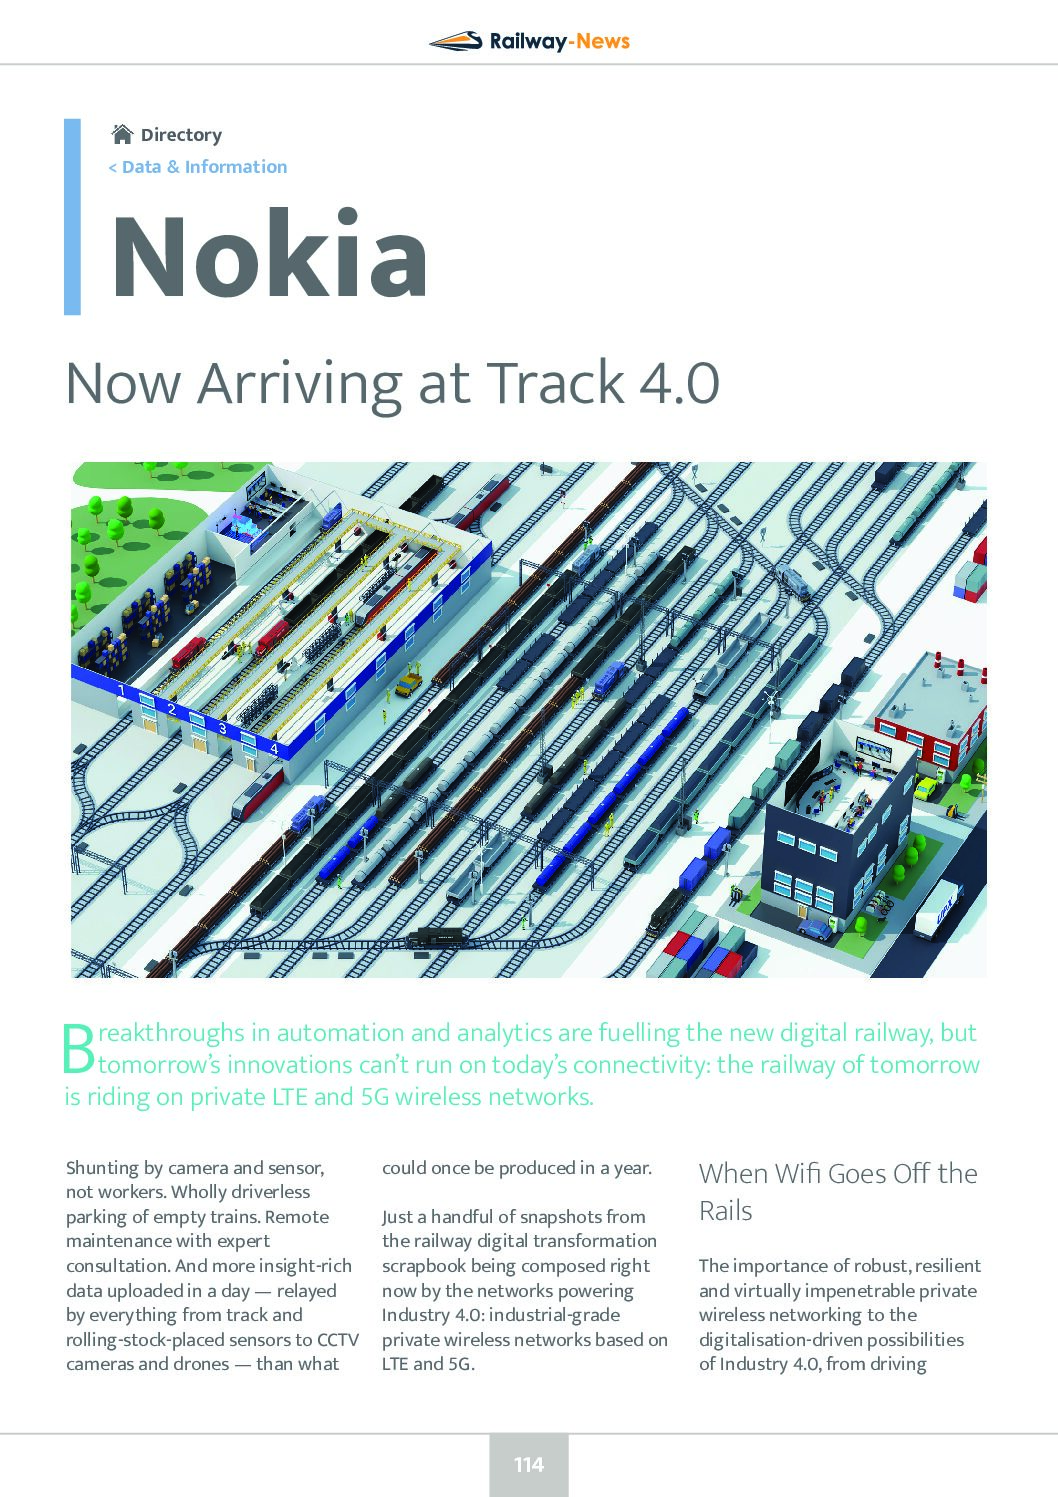 Now Arriving at Track 4.0